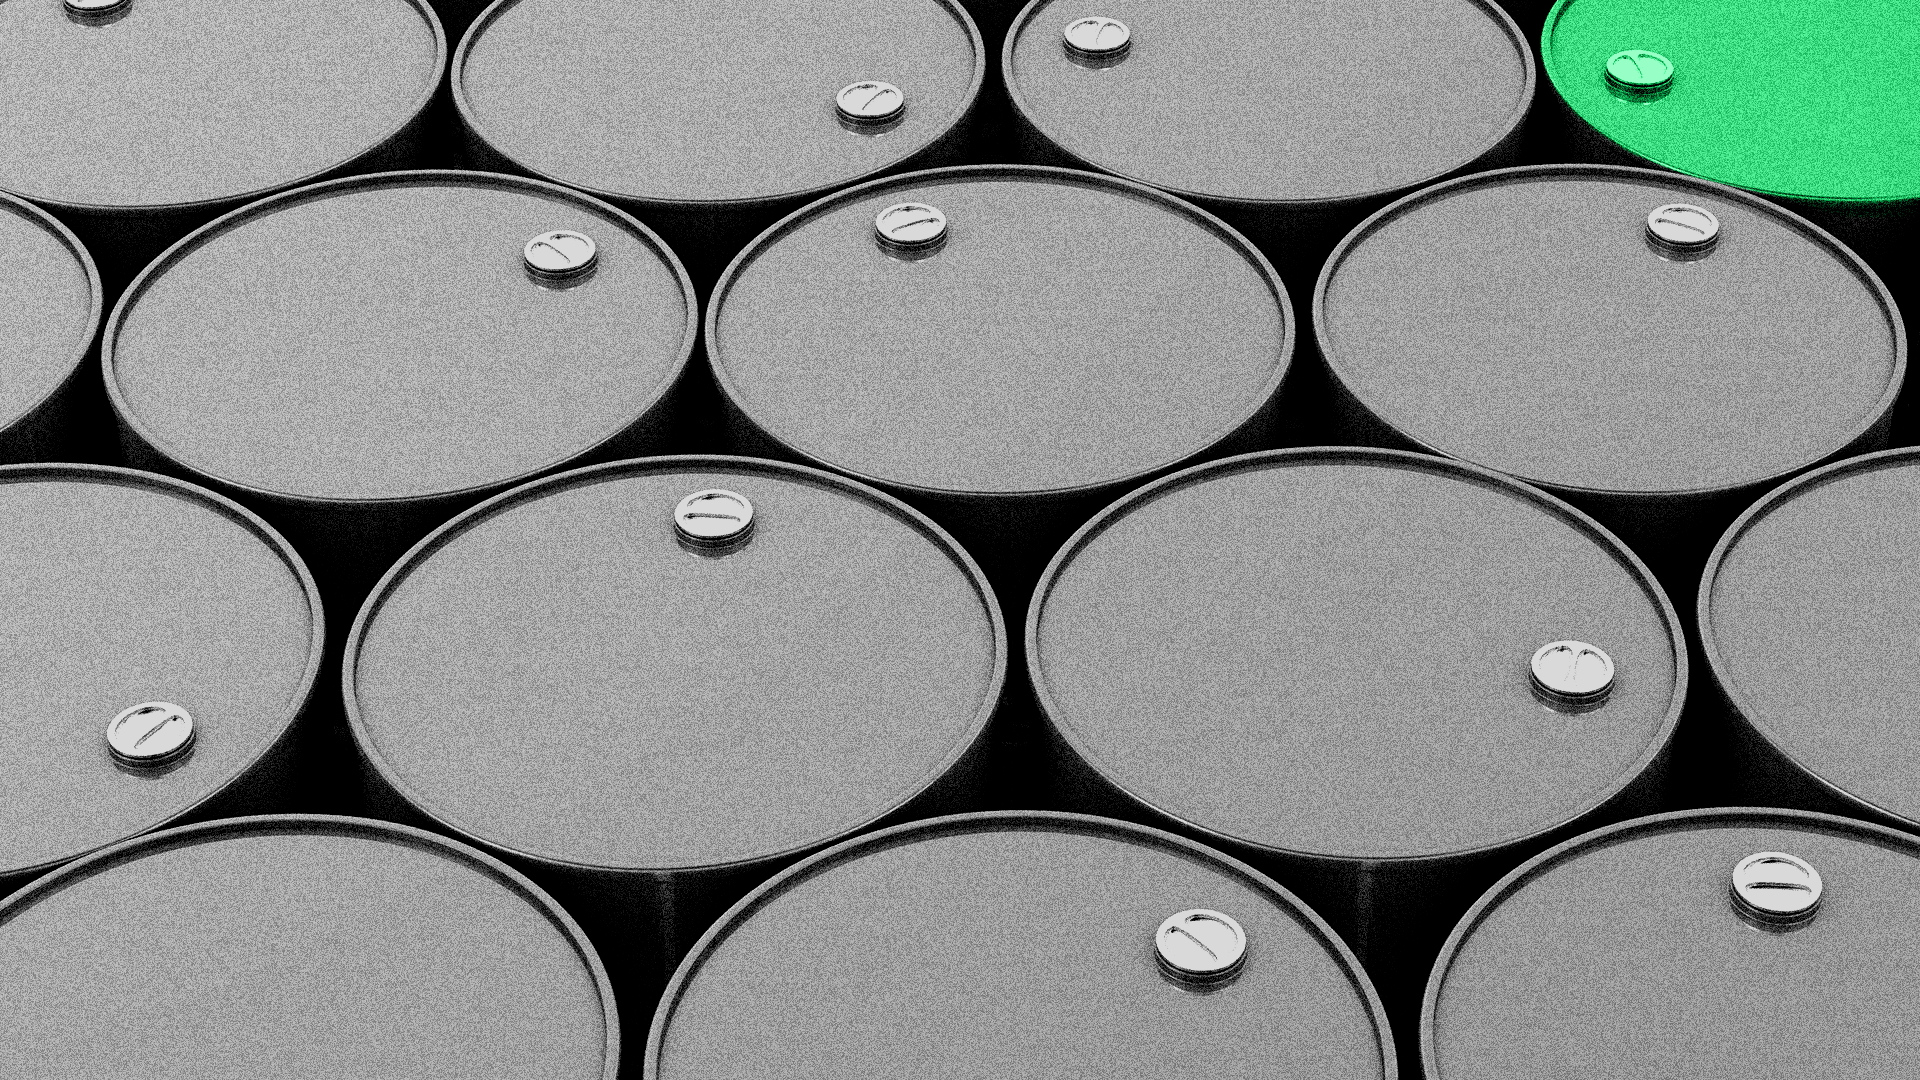 Group of black oil barrels with one green one